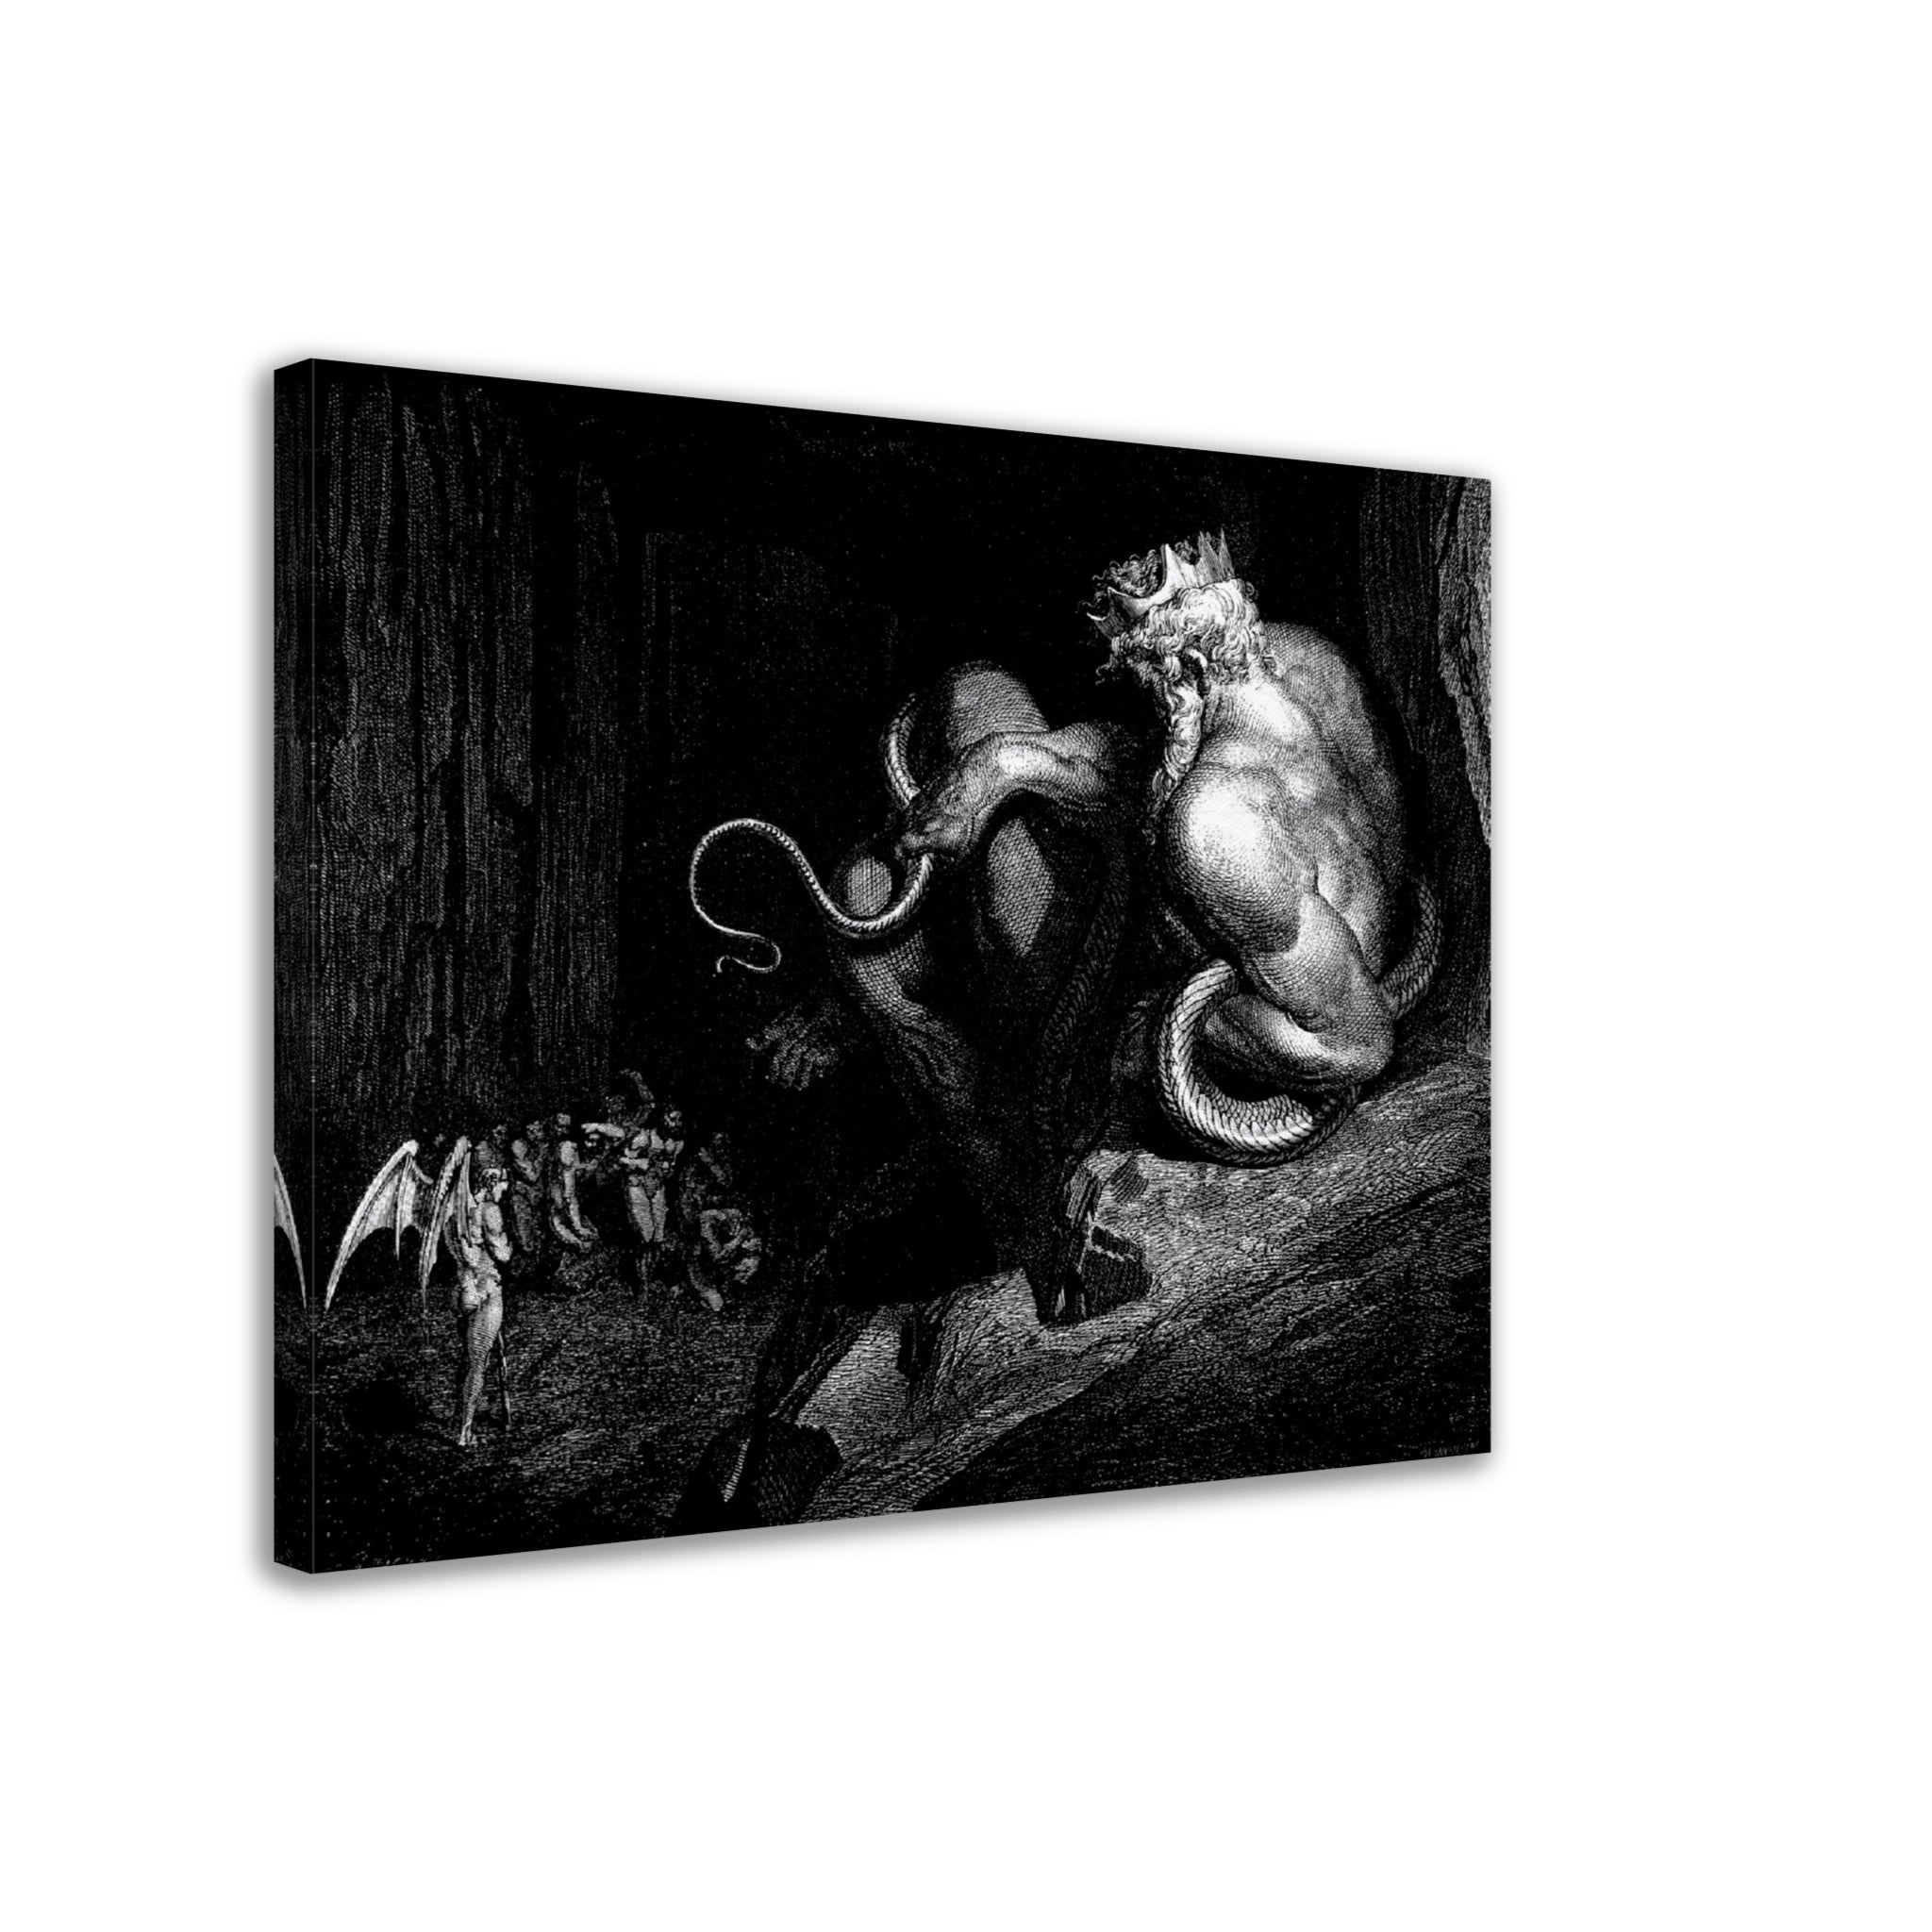 Divine Comedy Canvas - Demon King Minos With His Serpent Tail - Gustave Dore Illustration - WallArtPrints4U